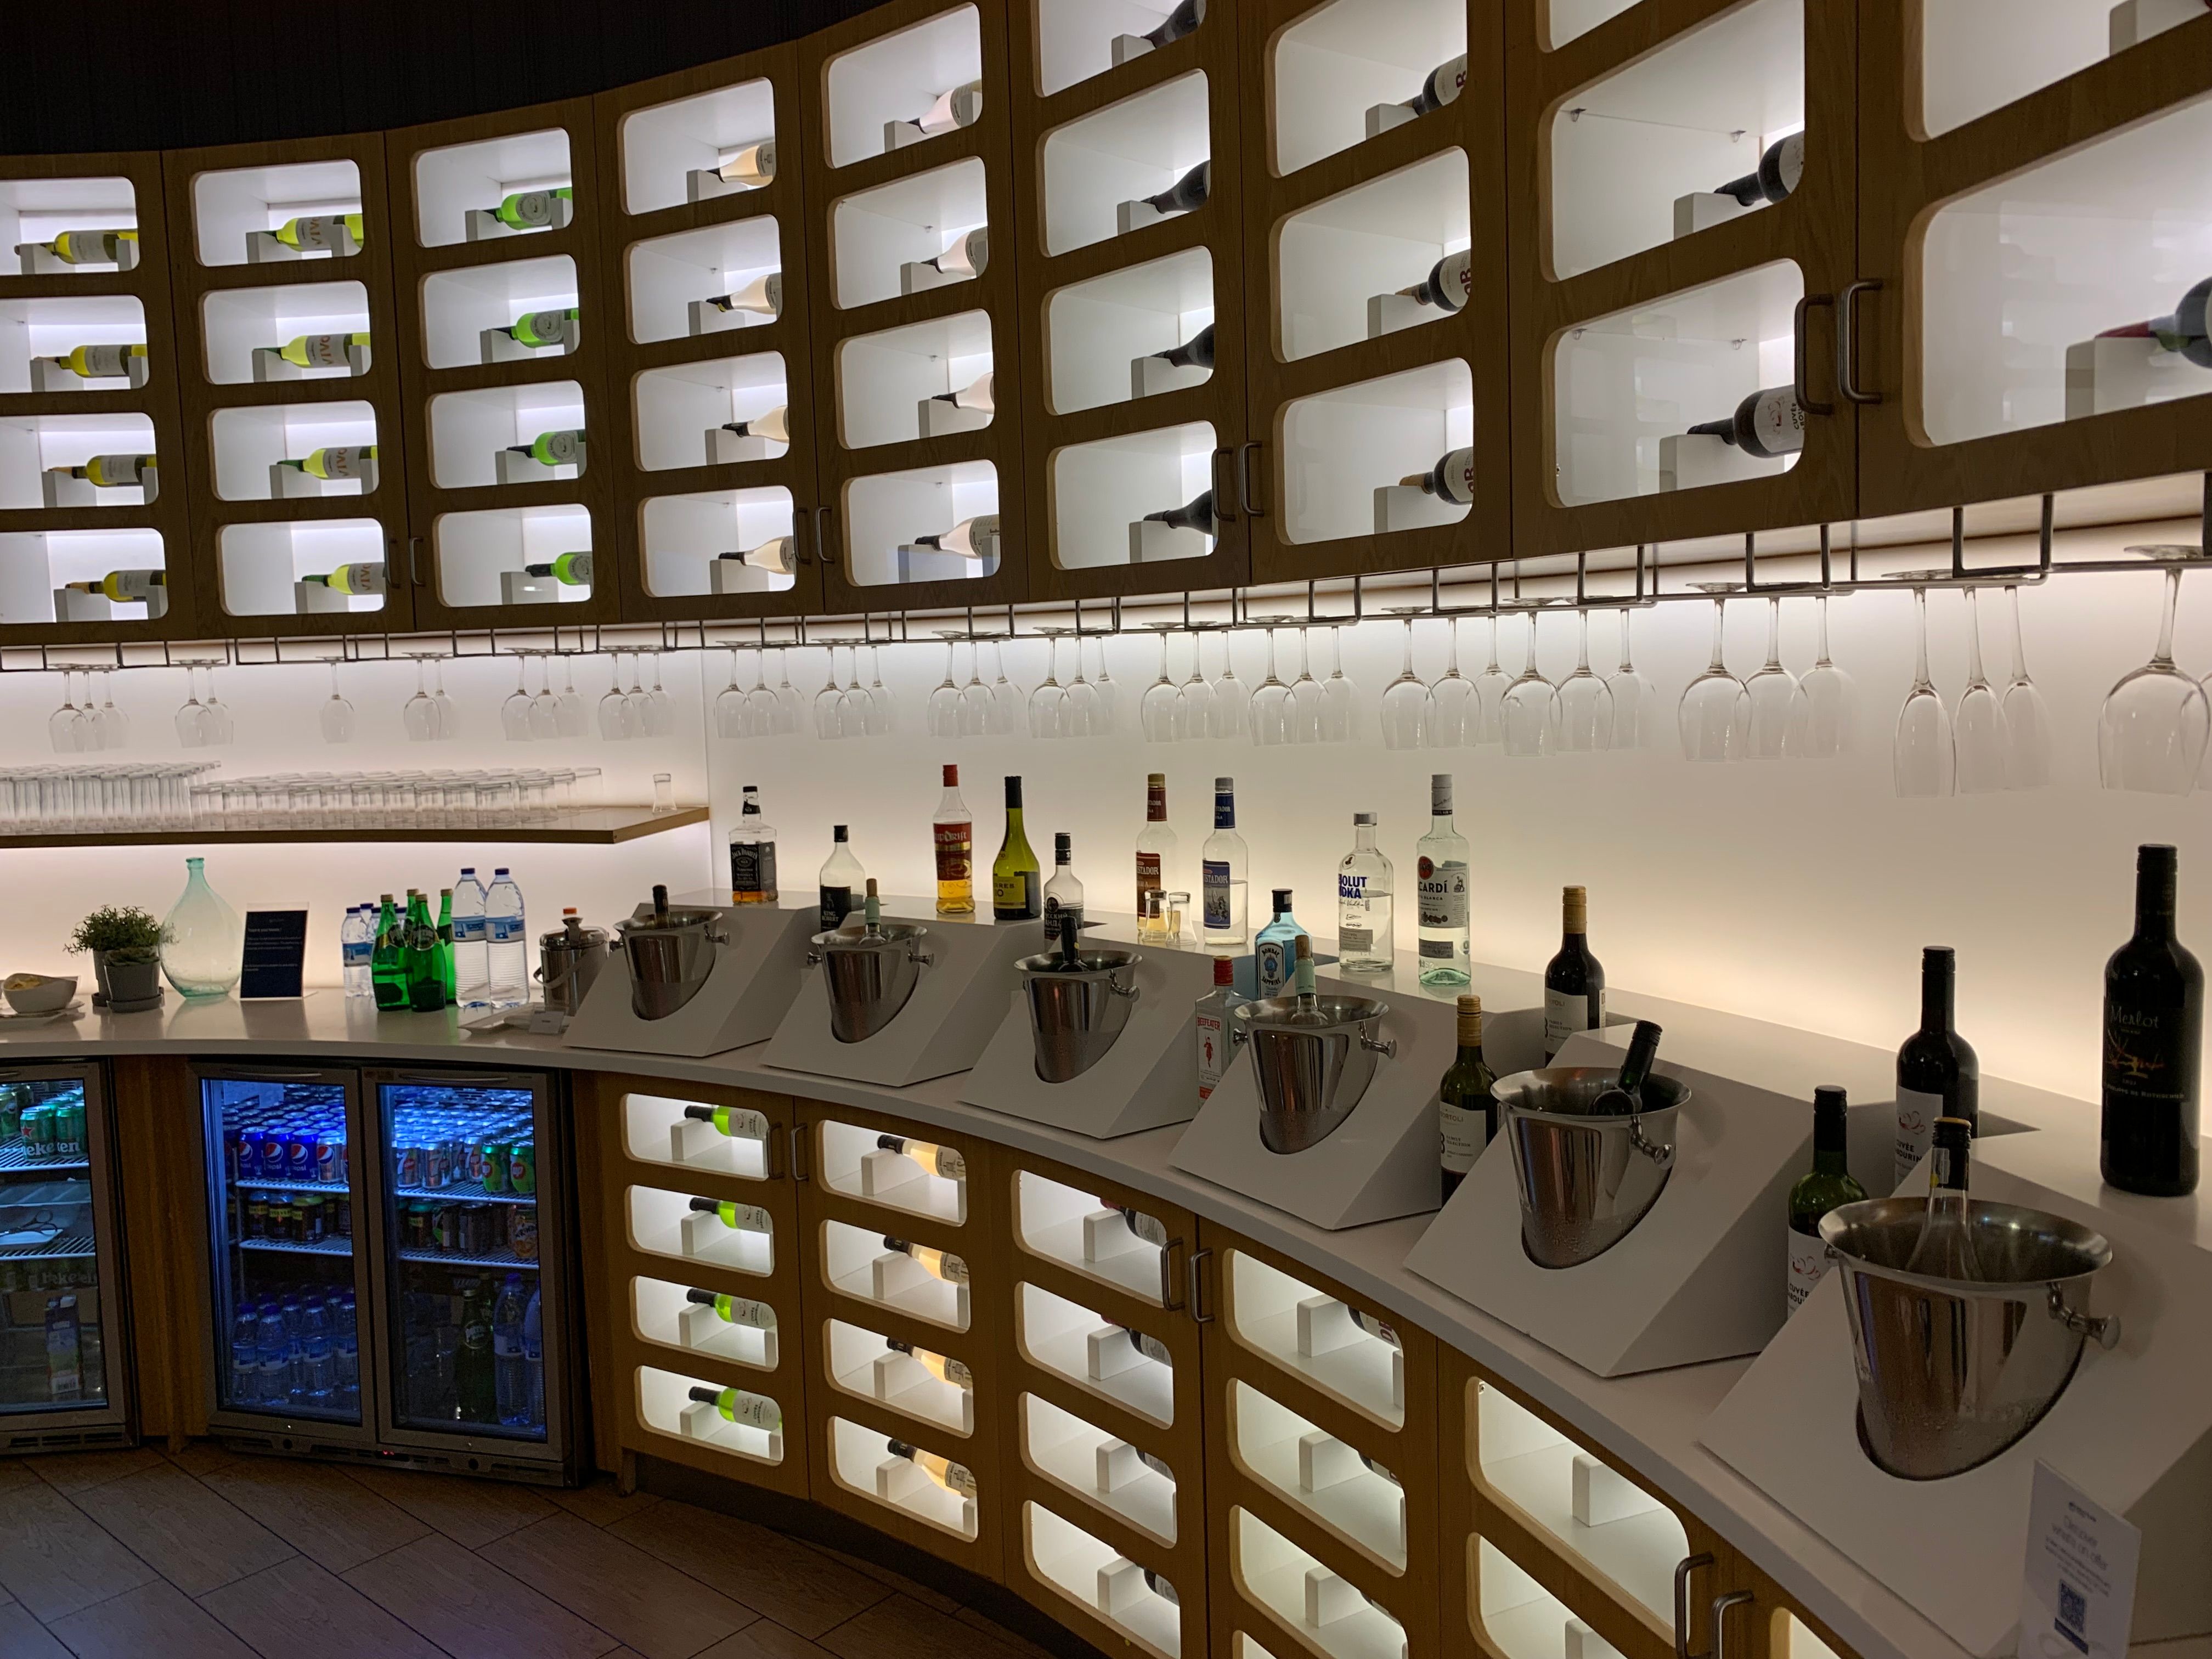 A variety of drinks can be found at the bar section.